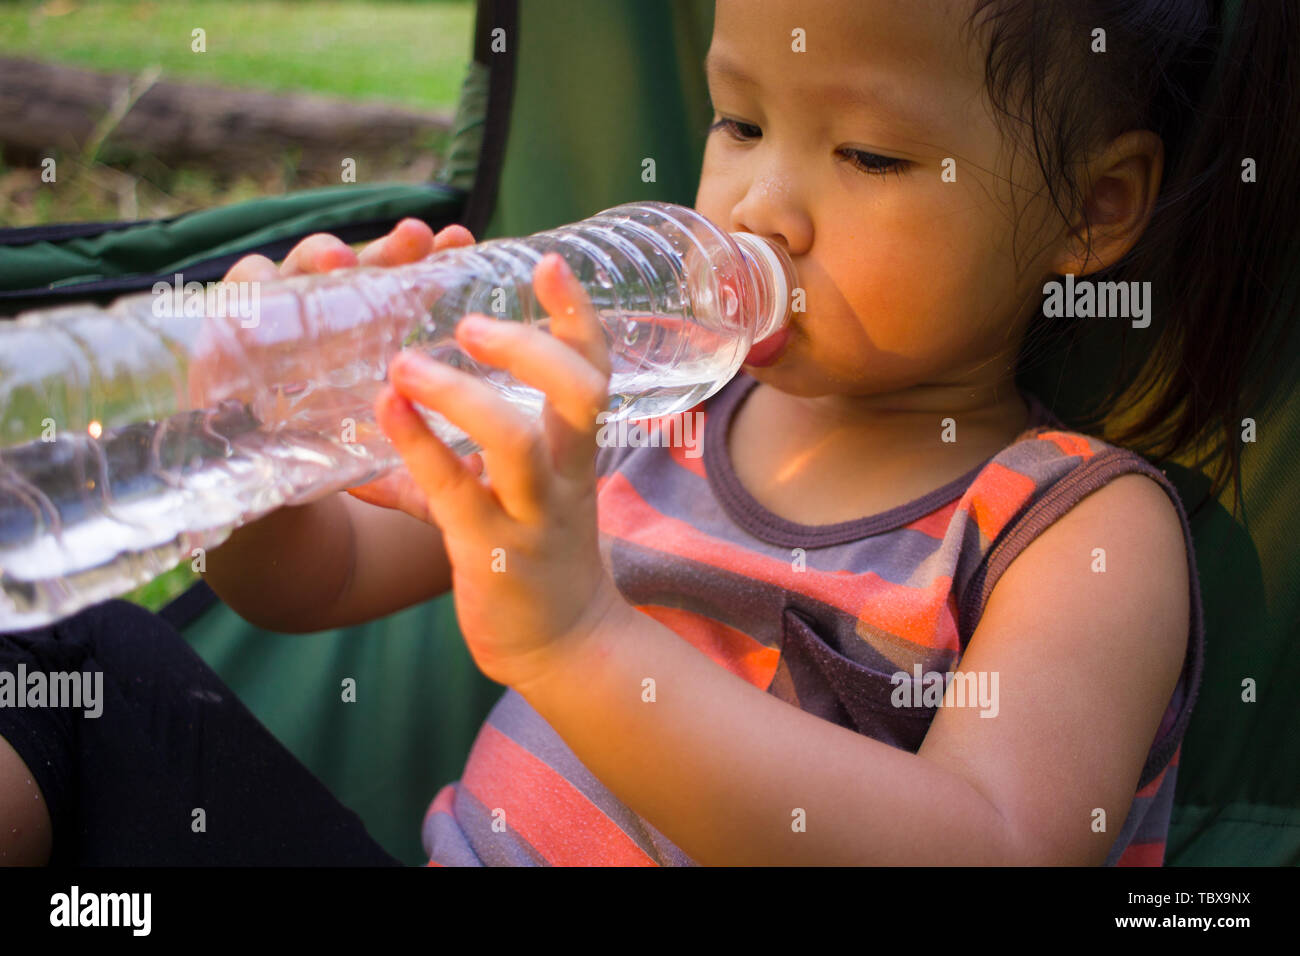 https://c8.alamy.com/comp/TBX9NX/little-children-drinking-water-from-bottle-in-green-park-high-resolution-image-gallery-TBX9NX.jpg